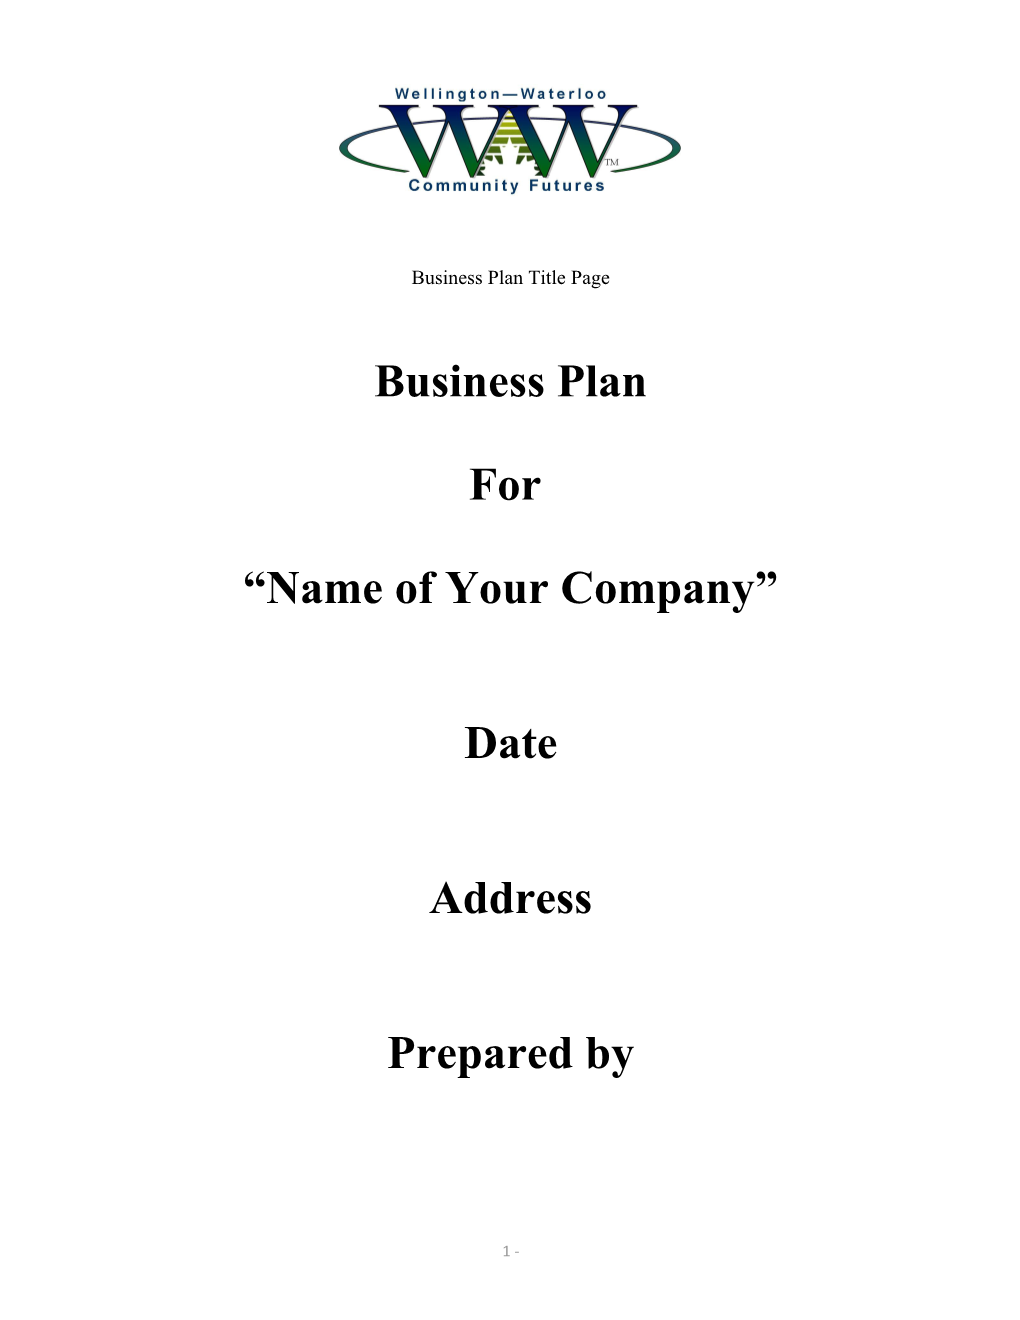 Business Plan Title Page